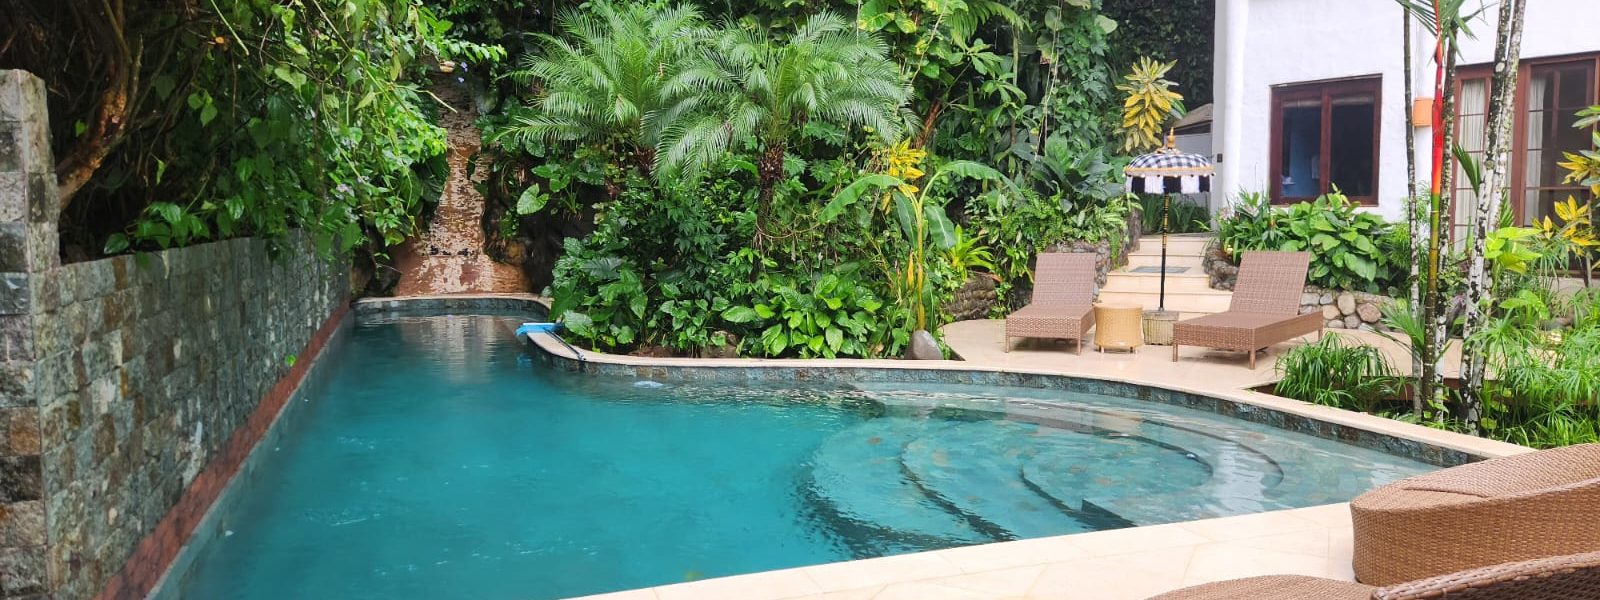 The pool area is surrounded by a perfectly-maintained garden full of lush vibrant tropical plants. 